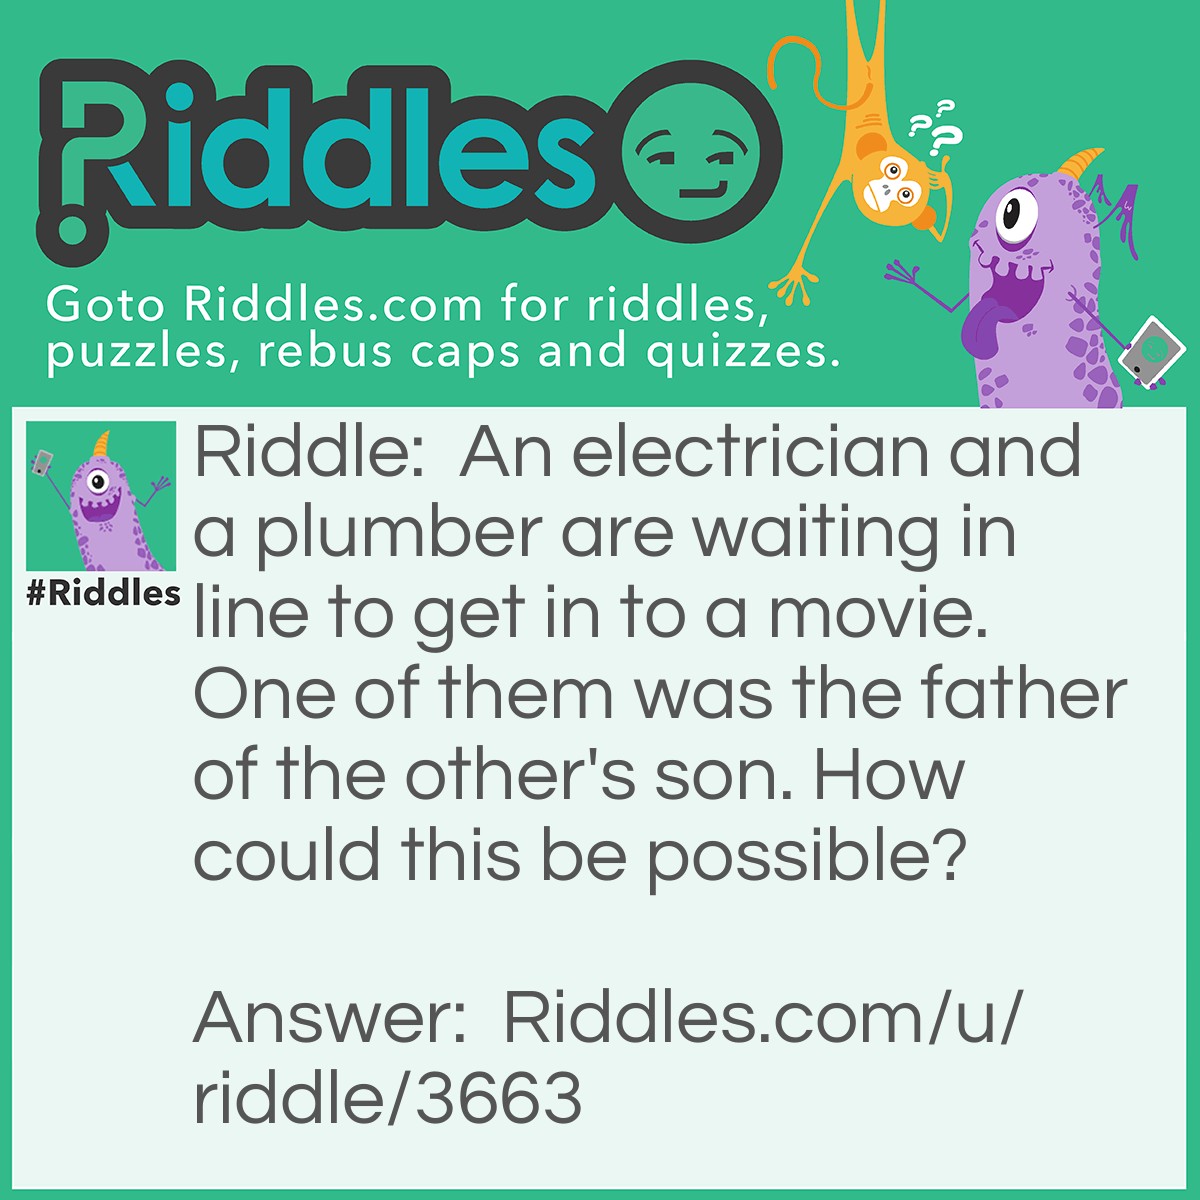 Riddle: An electrician and a plumber are waiting in line to get in to a movie. One of them was the father of the other's son. How could this be possible? Answer: The plumber and electrician are husband and wife.